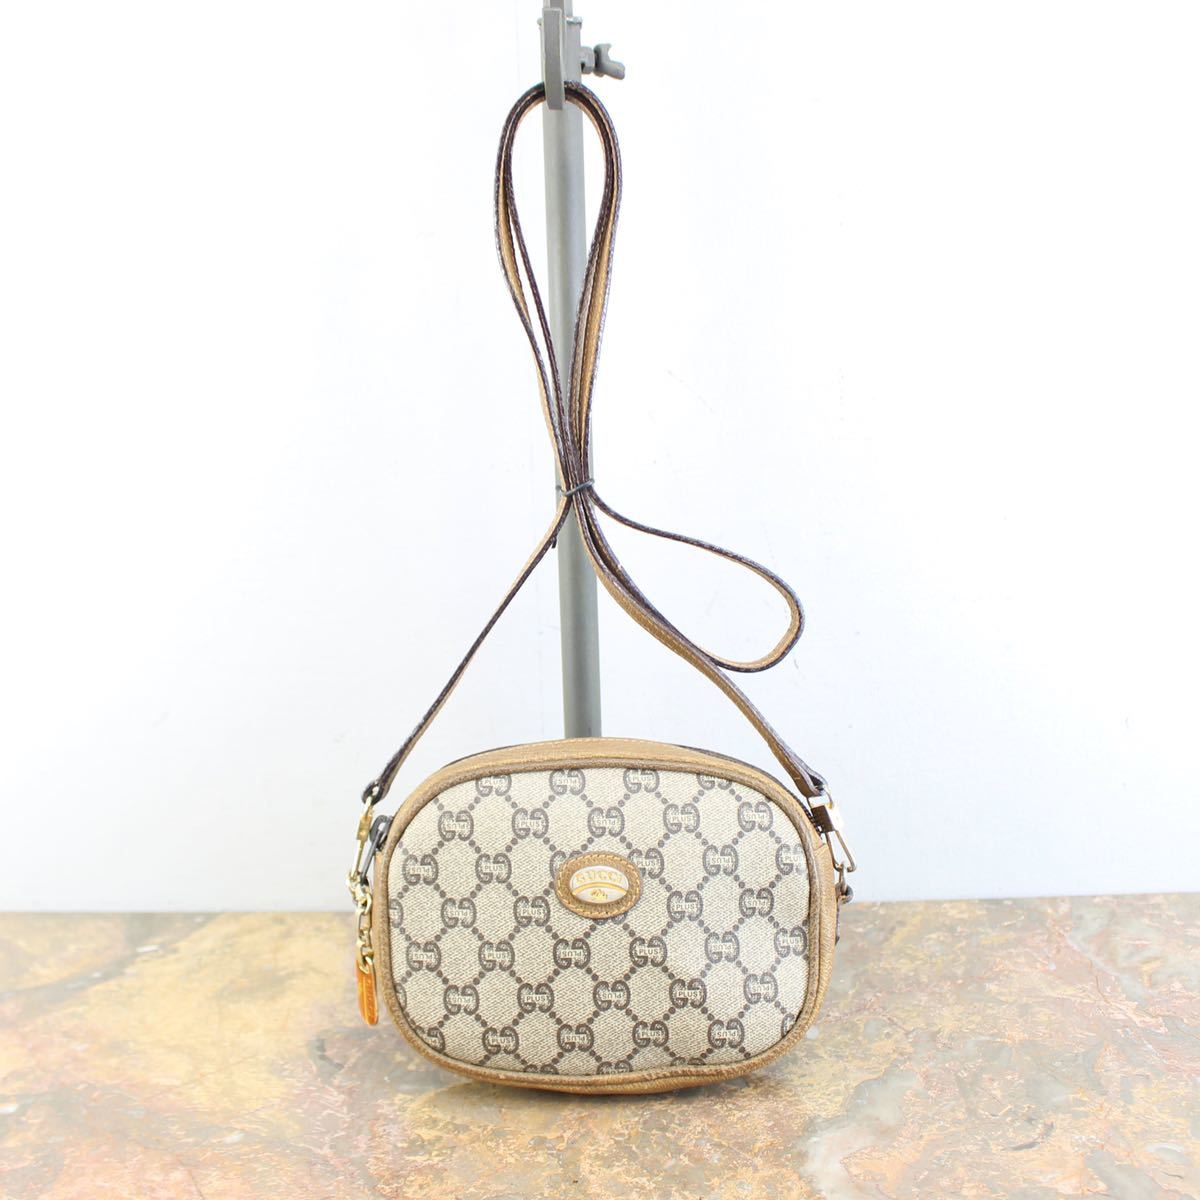 OLD GUCCI PLUS GG PATTERNED MINI SHOULDER BAG MADE IN ITALY